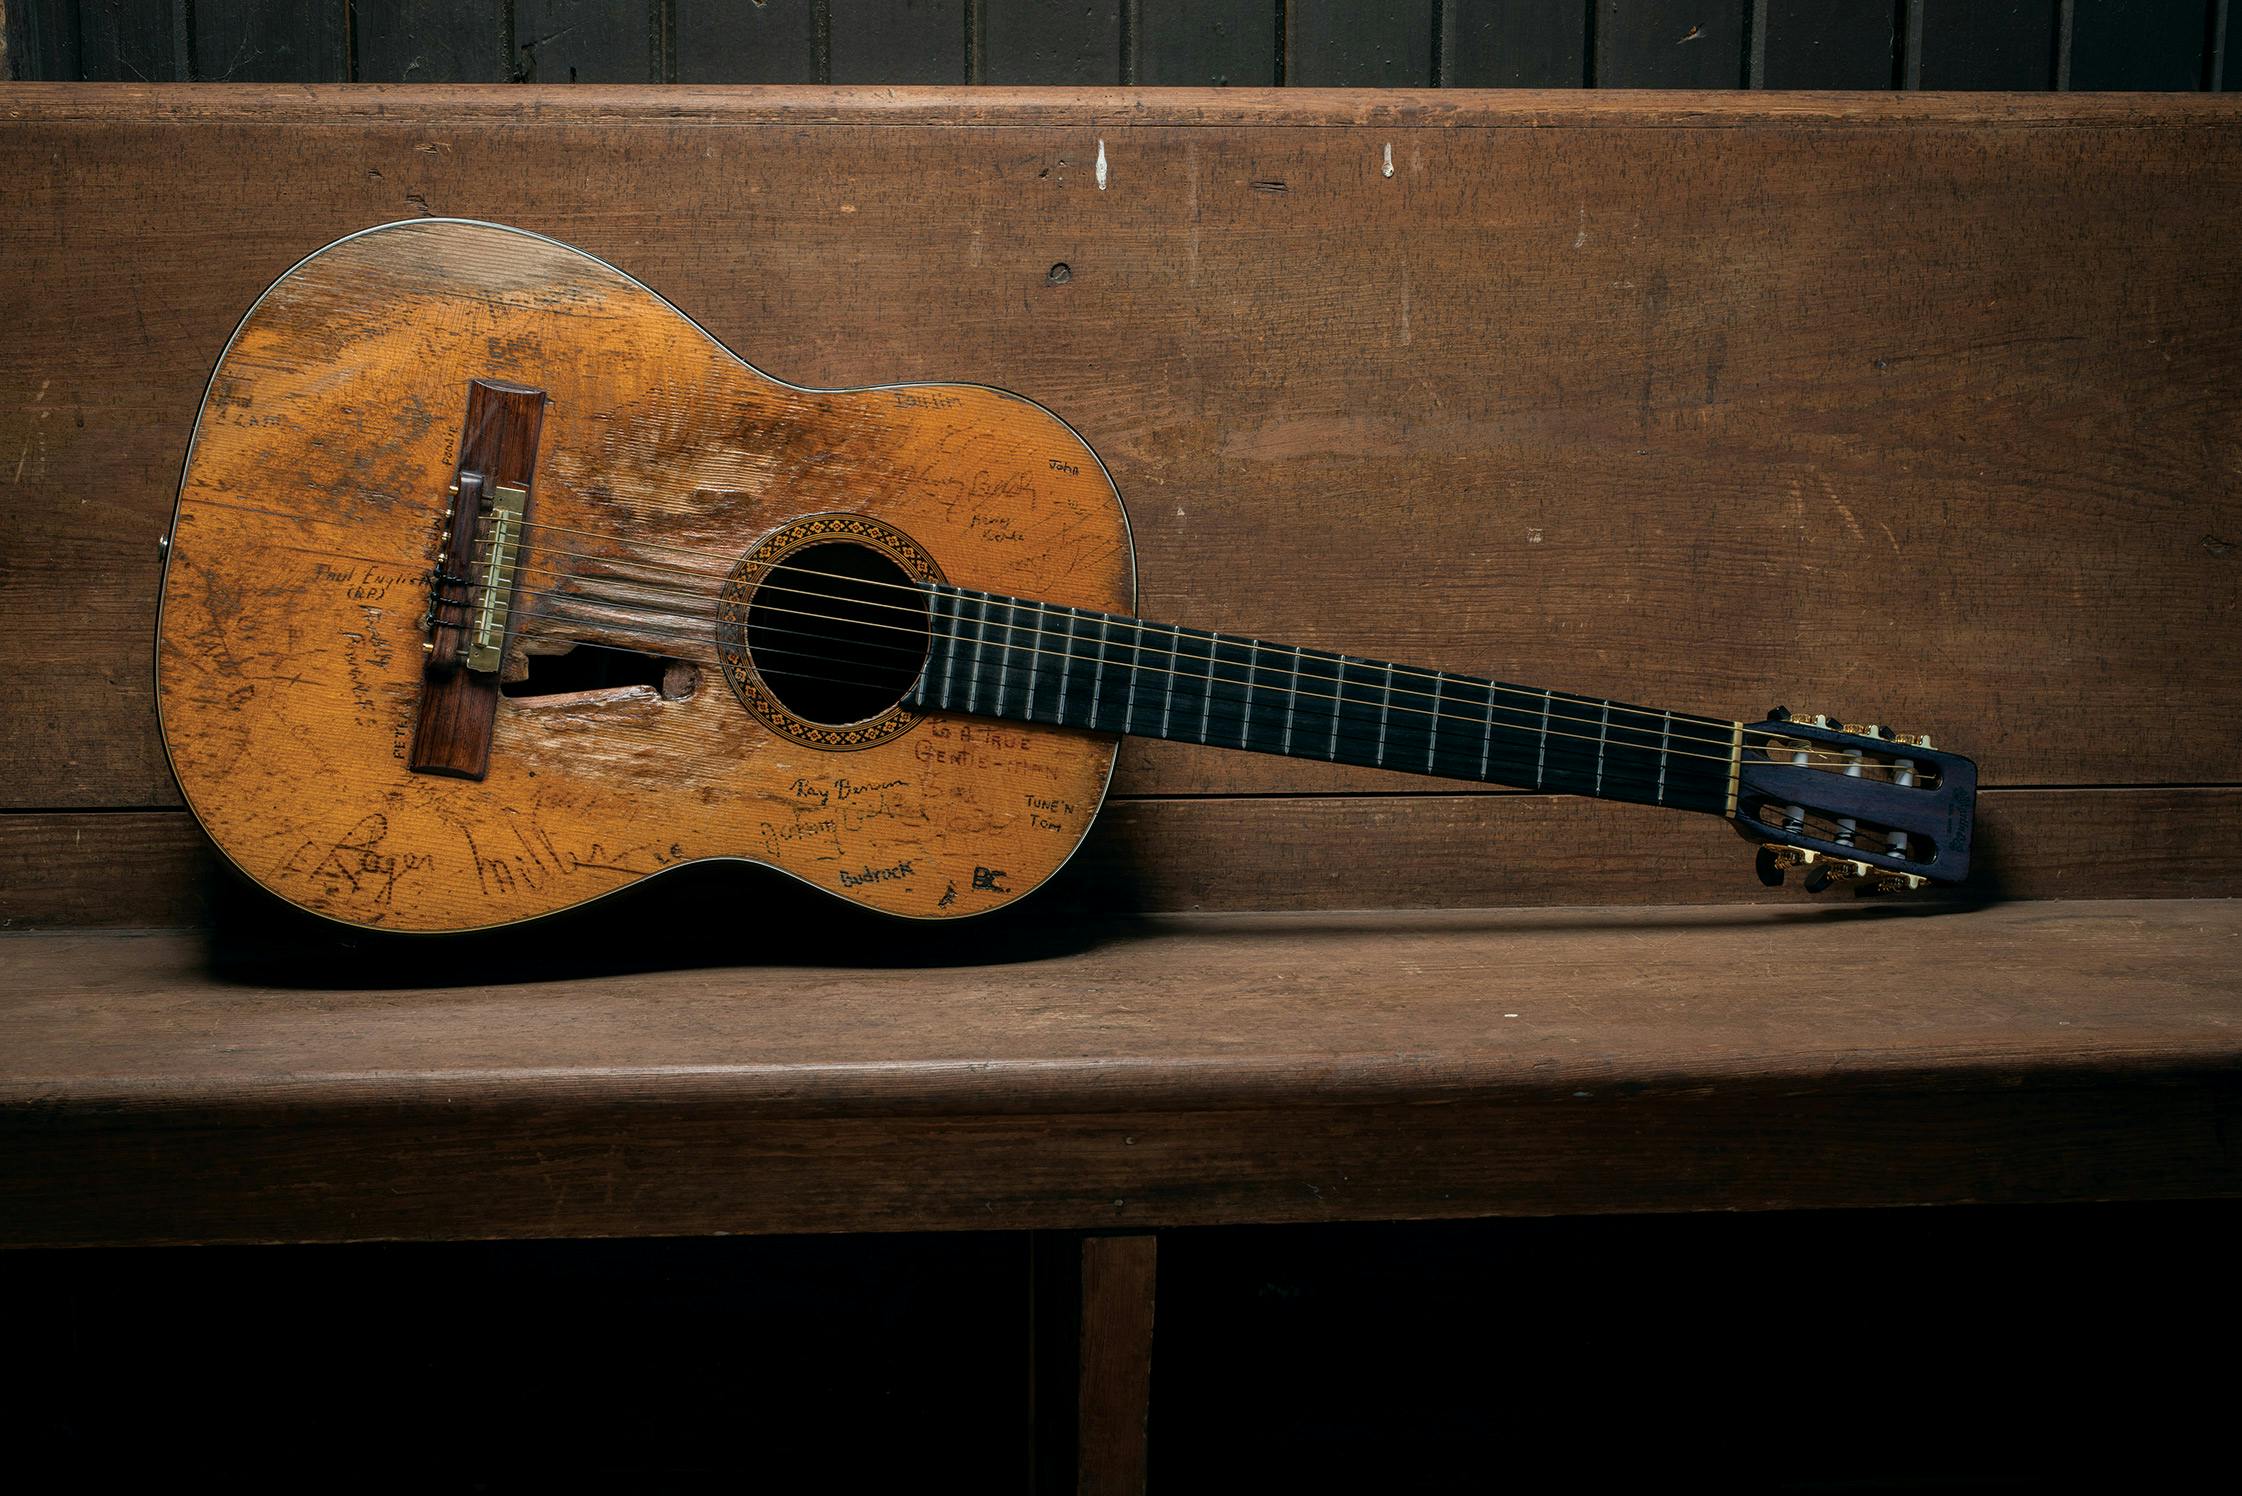 Nelson's longtime guitar, Trigger, photographed at Nelson's ranch.